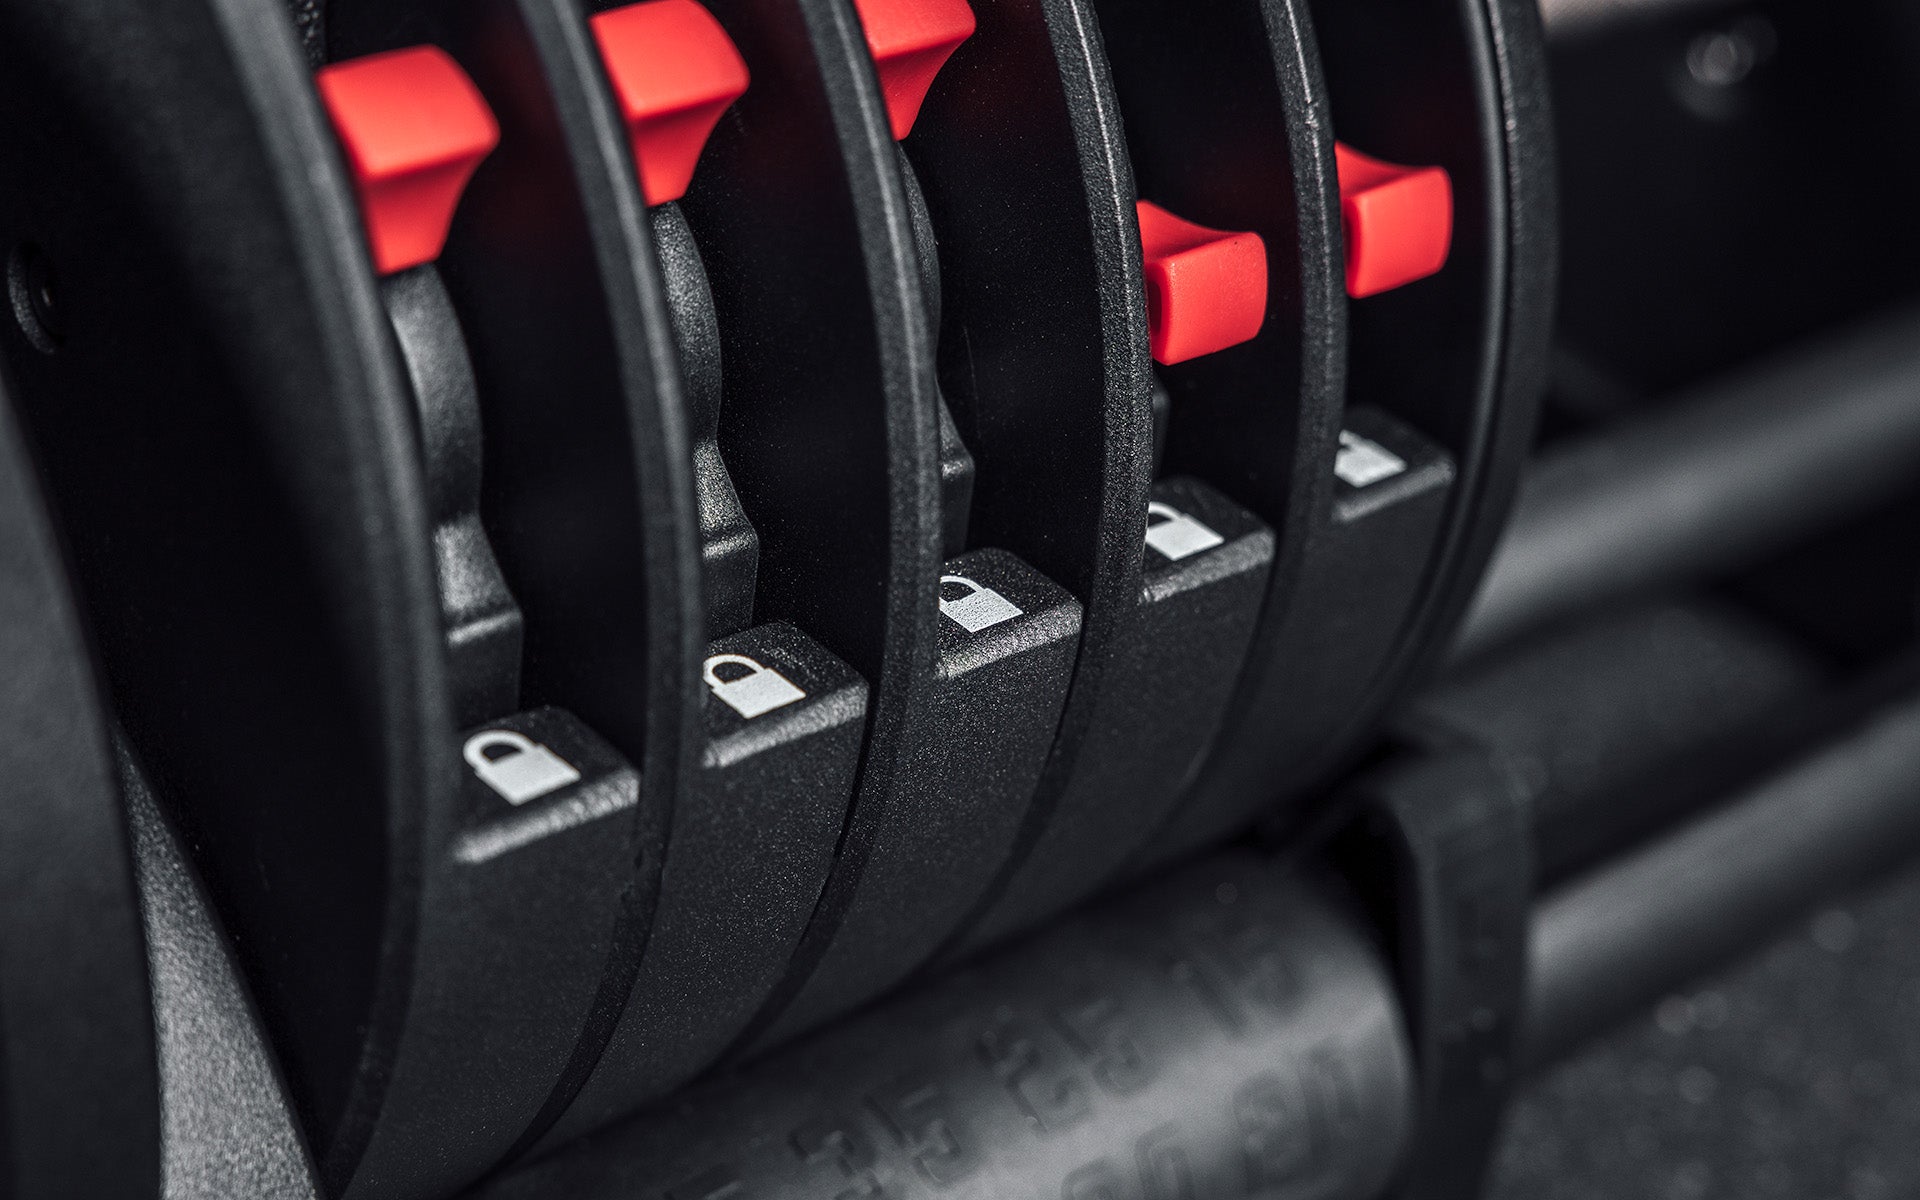 Close-up view of the red switches which serve as the locking mechanism when selecting the amount of weight for your REP Fitness QuickDraw Adjustable Dumbbell.